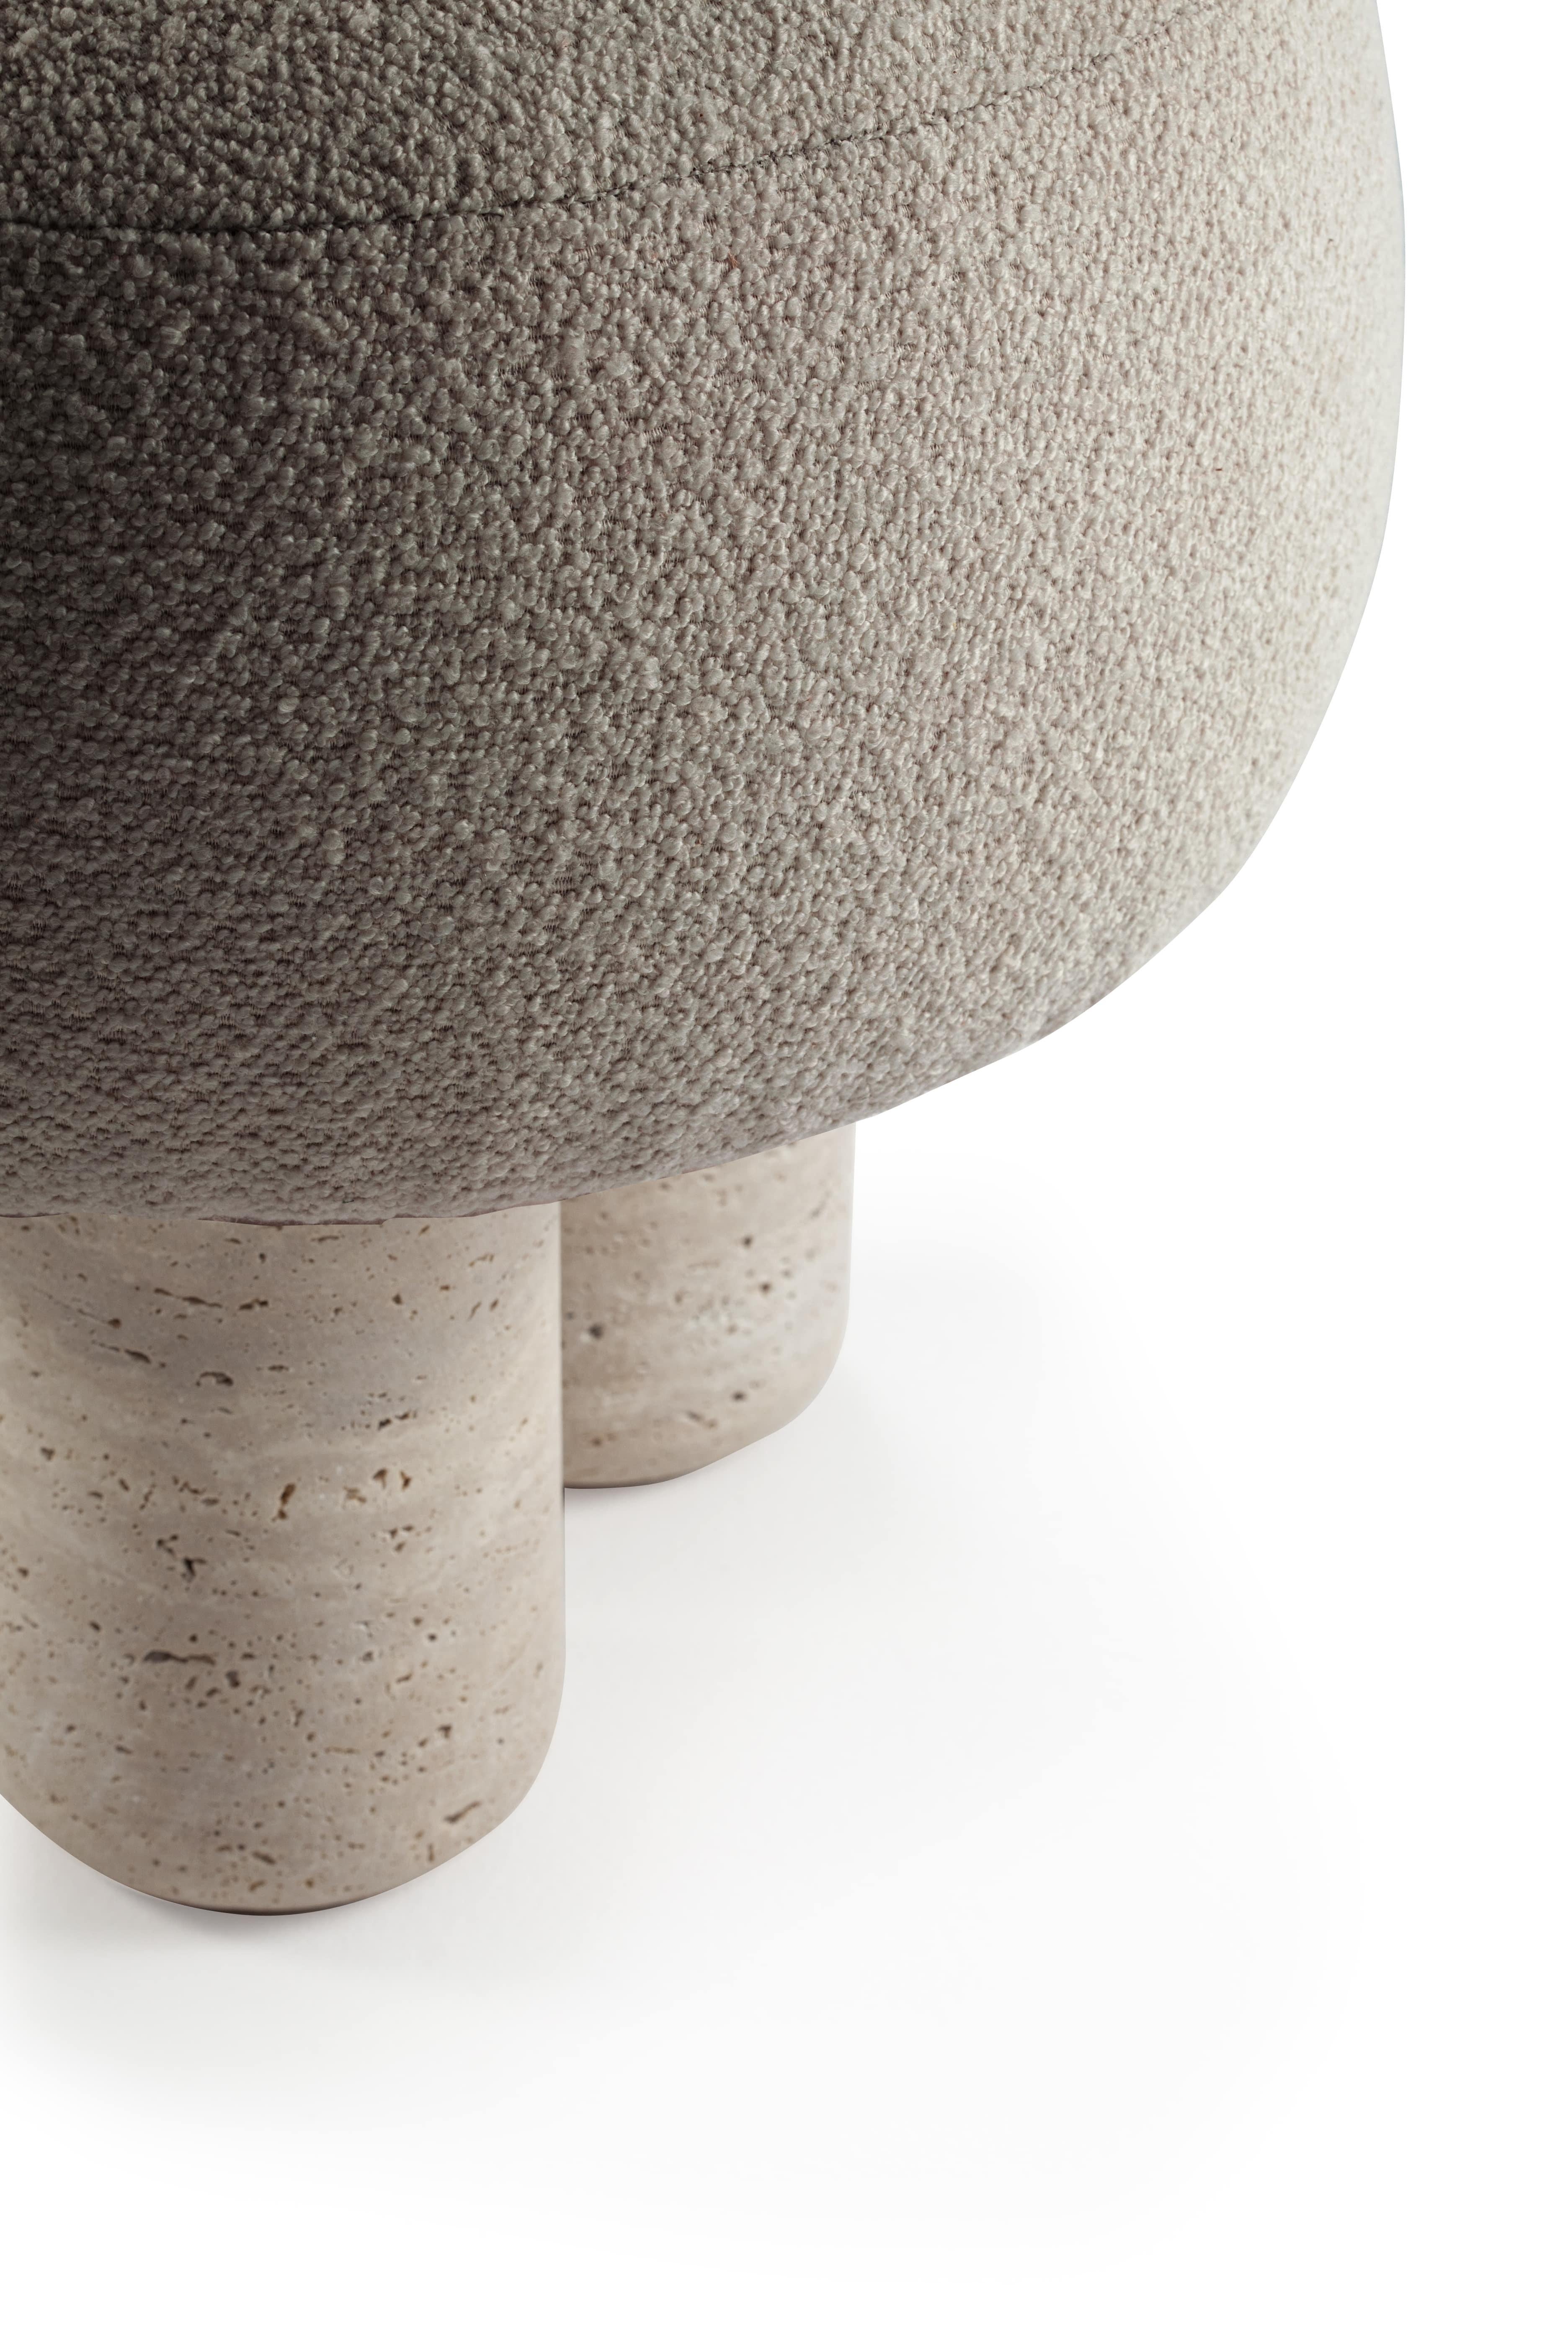 21st Century Designed by Saccal Design House Hygge Stool Latte Boucle Travertino In New Condition For Sale In Castelo da Maia, PT